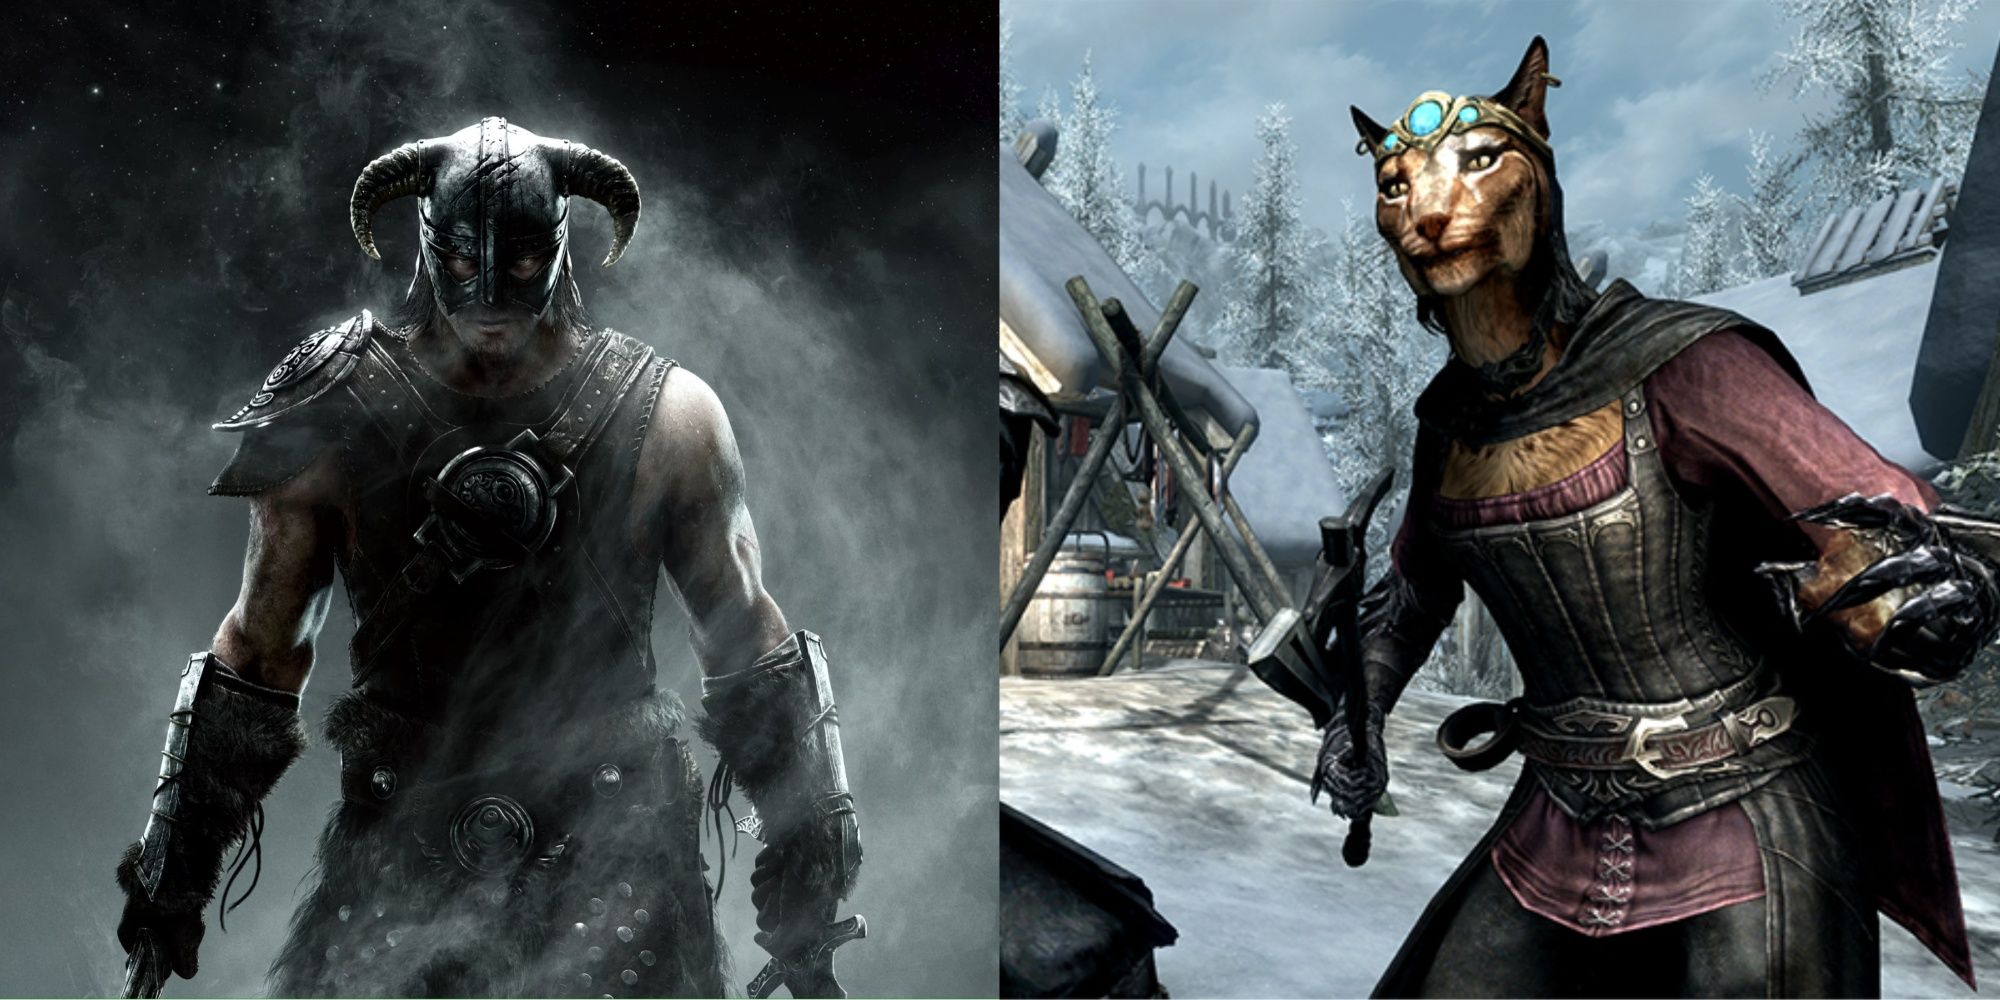 A collage showing the Dragorn born in mist and a Khajiit character.